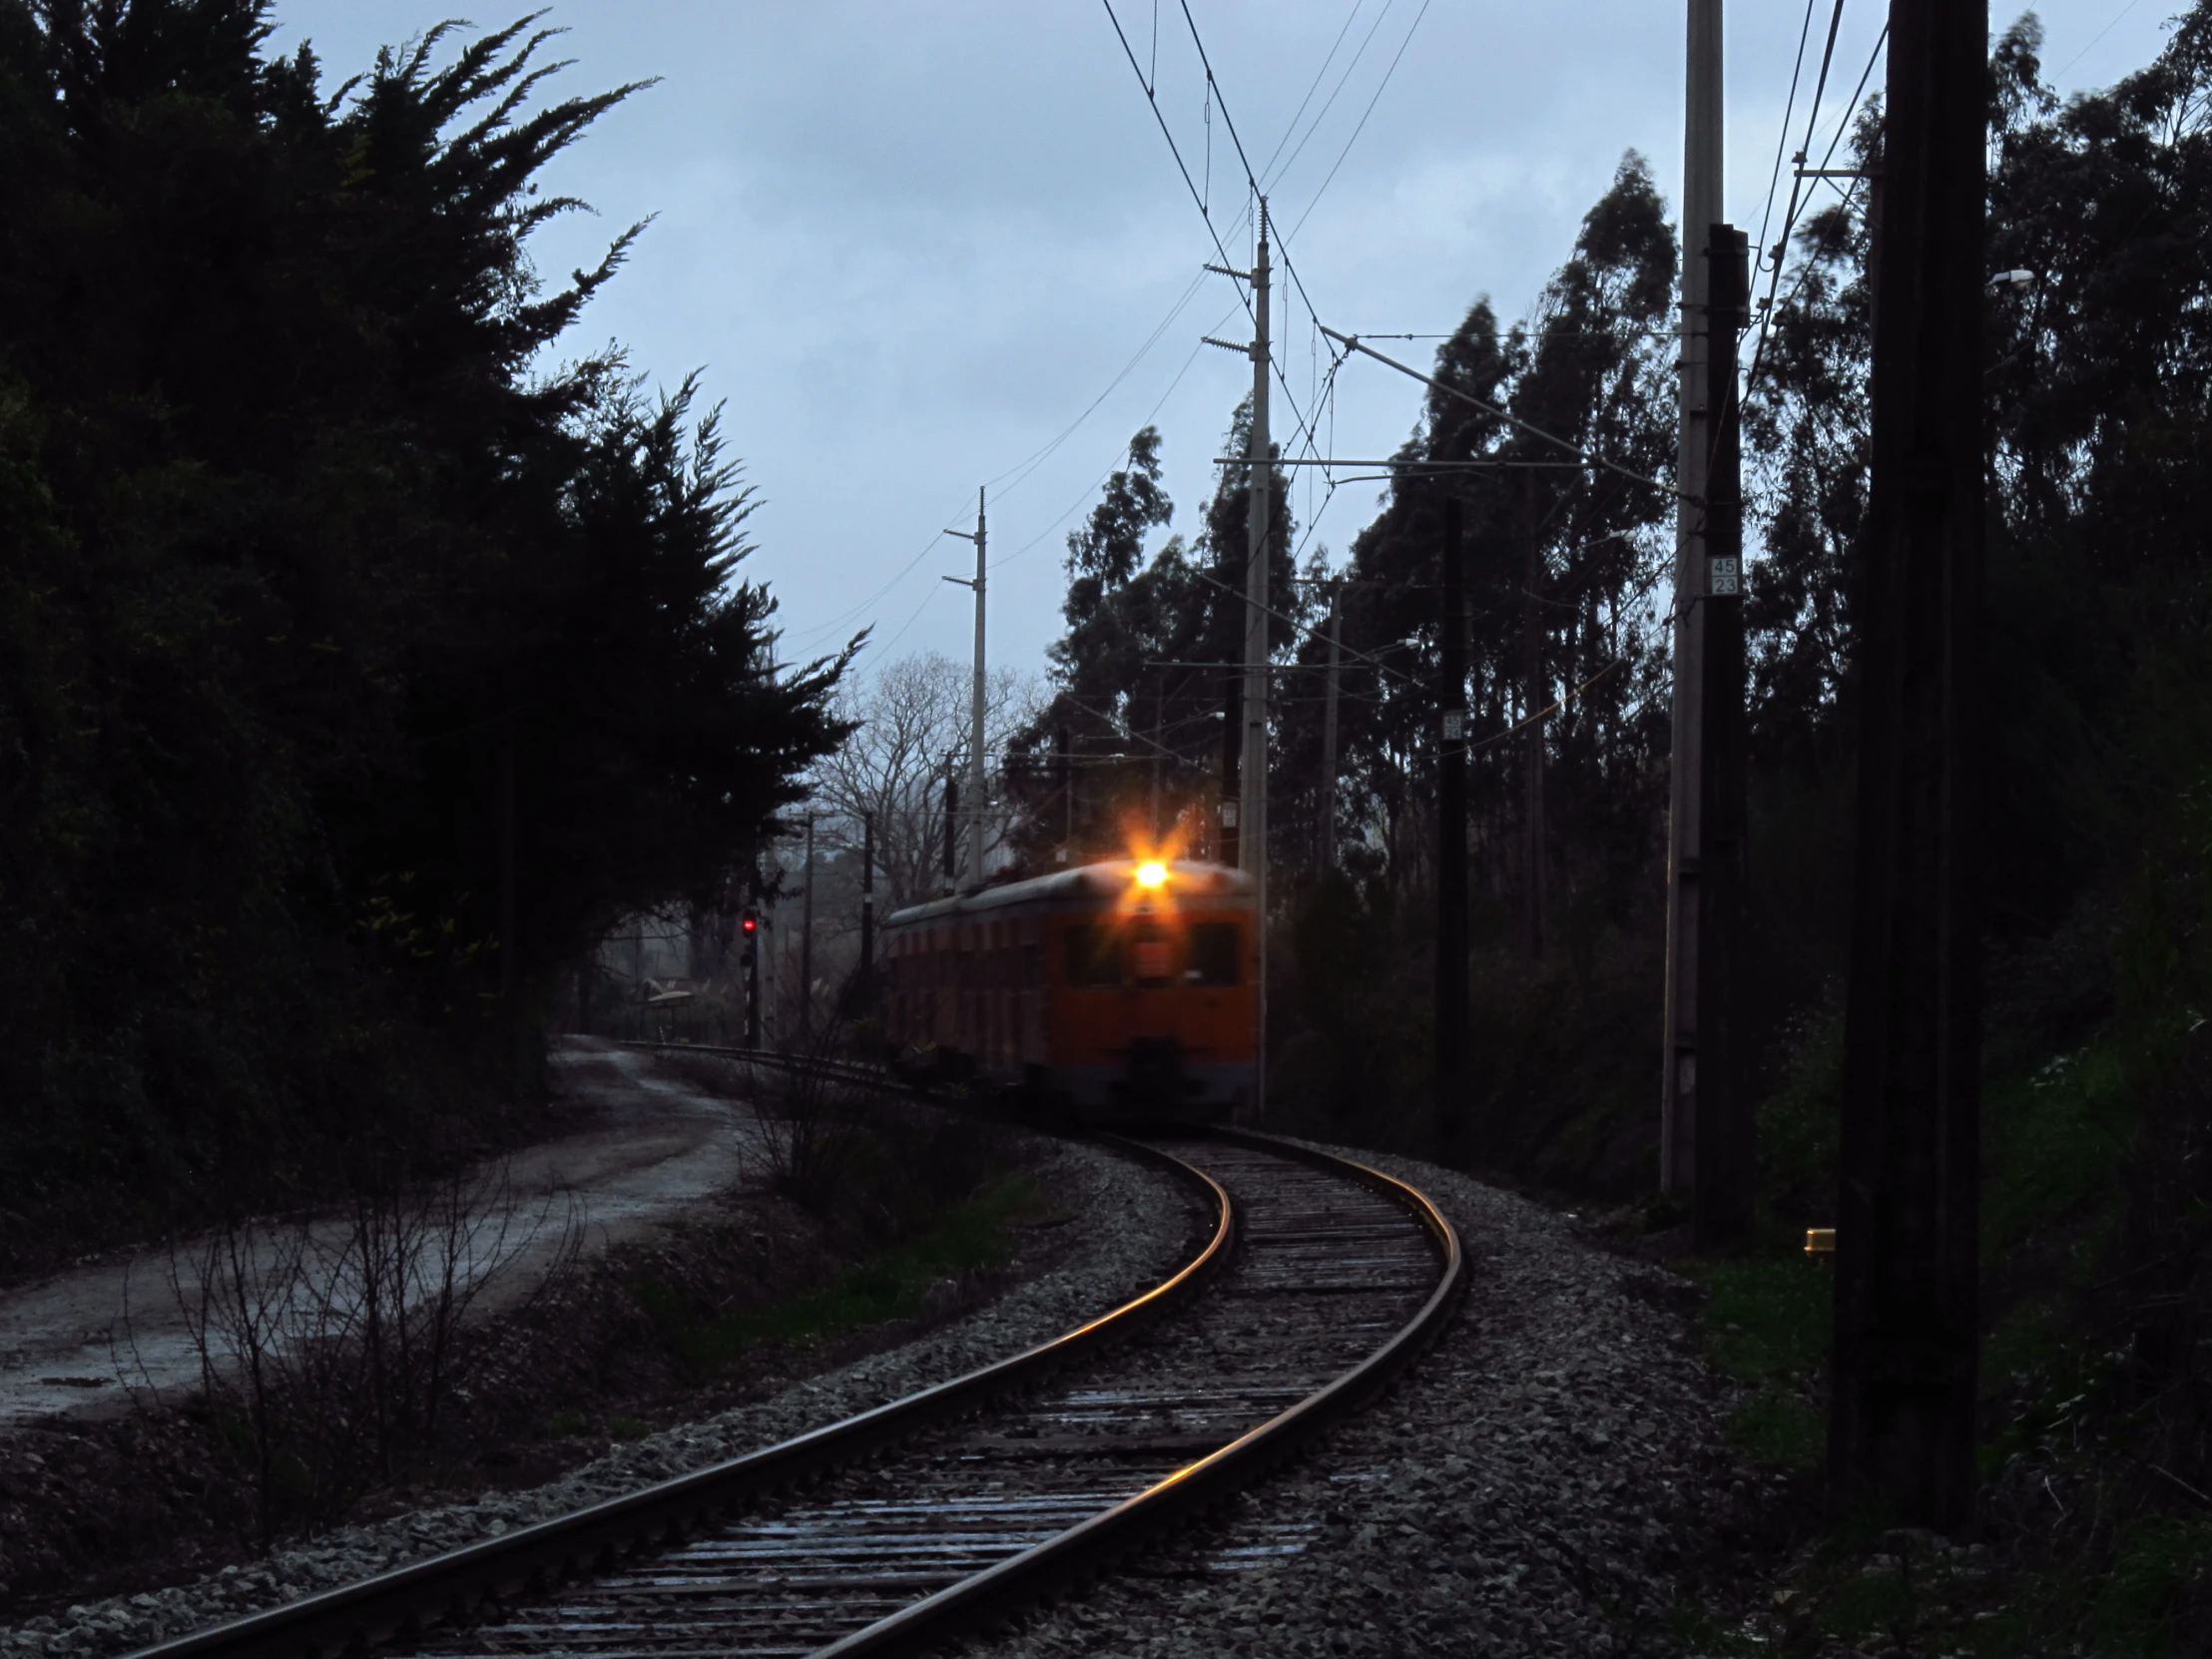 the train is traveling down the tracks as dark comes